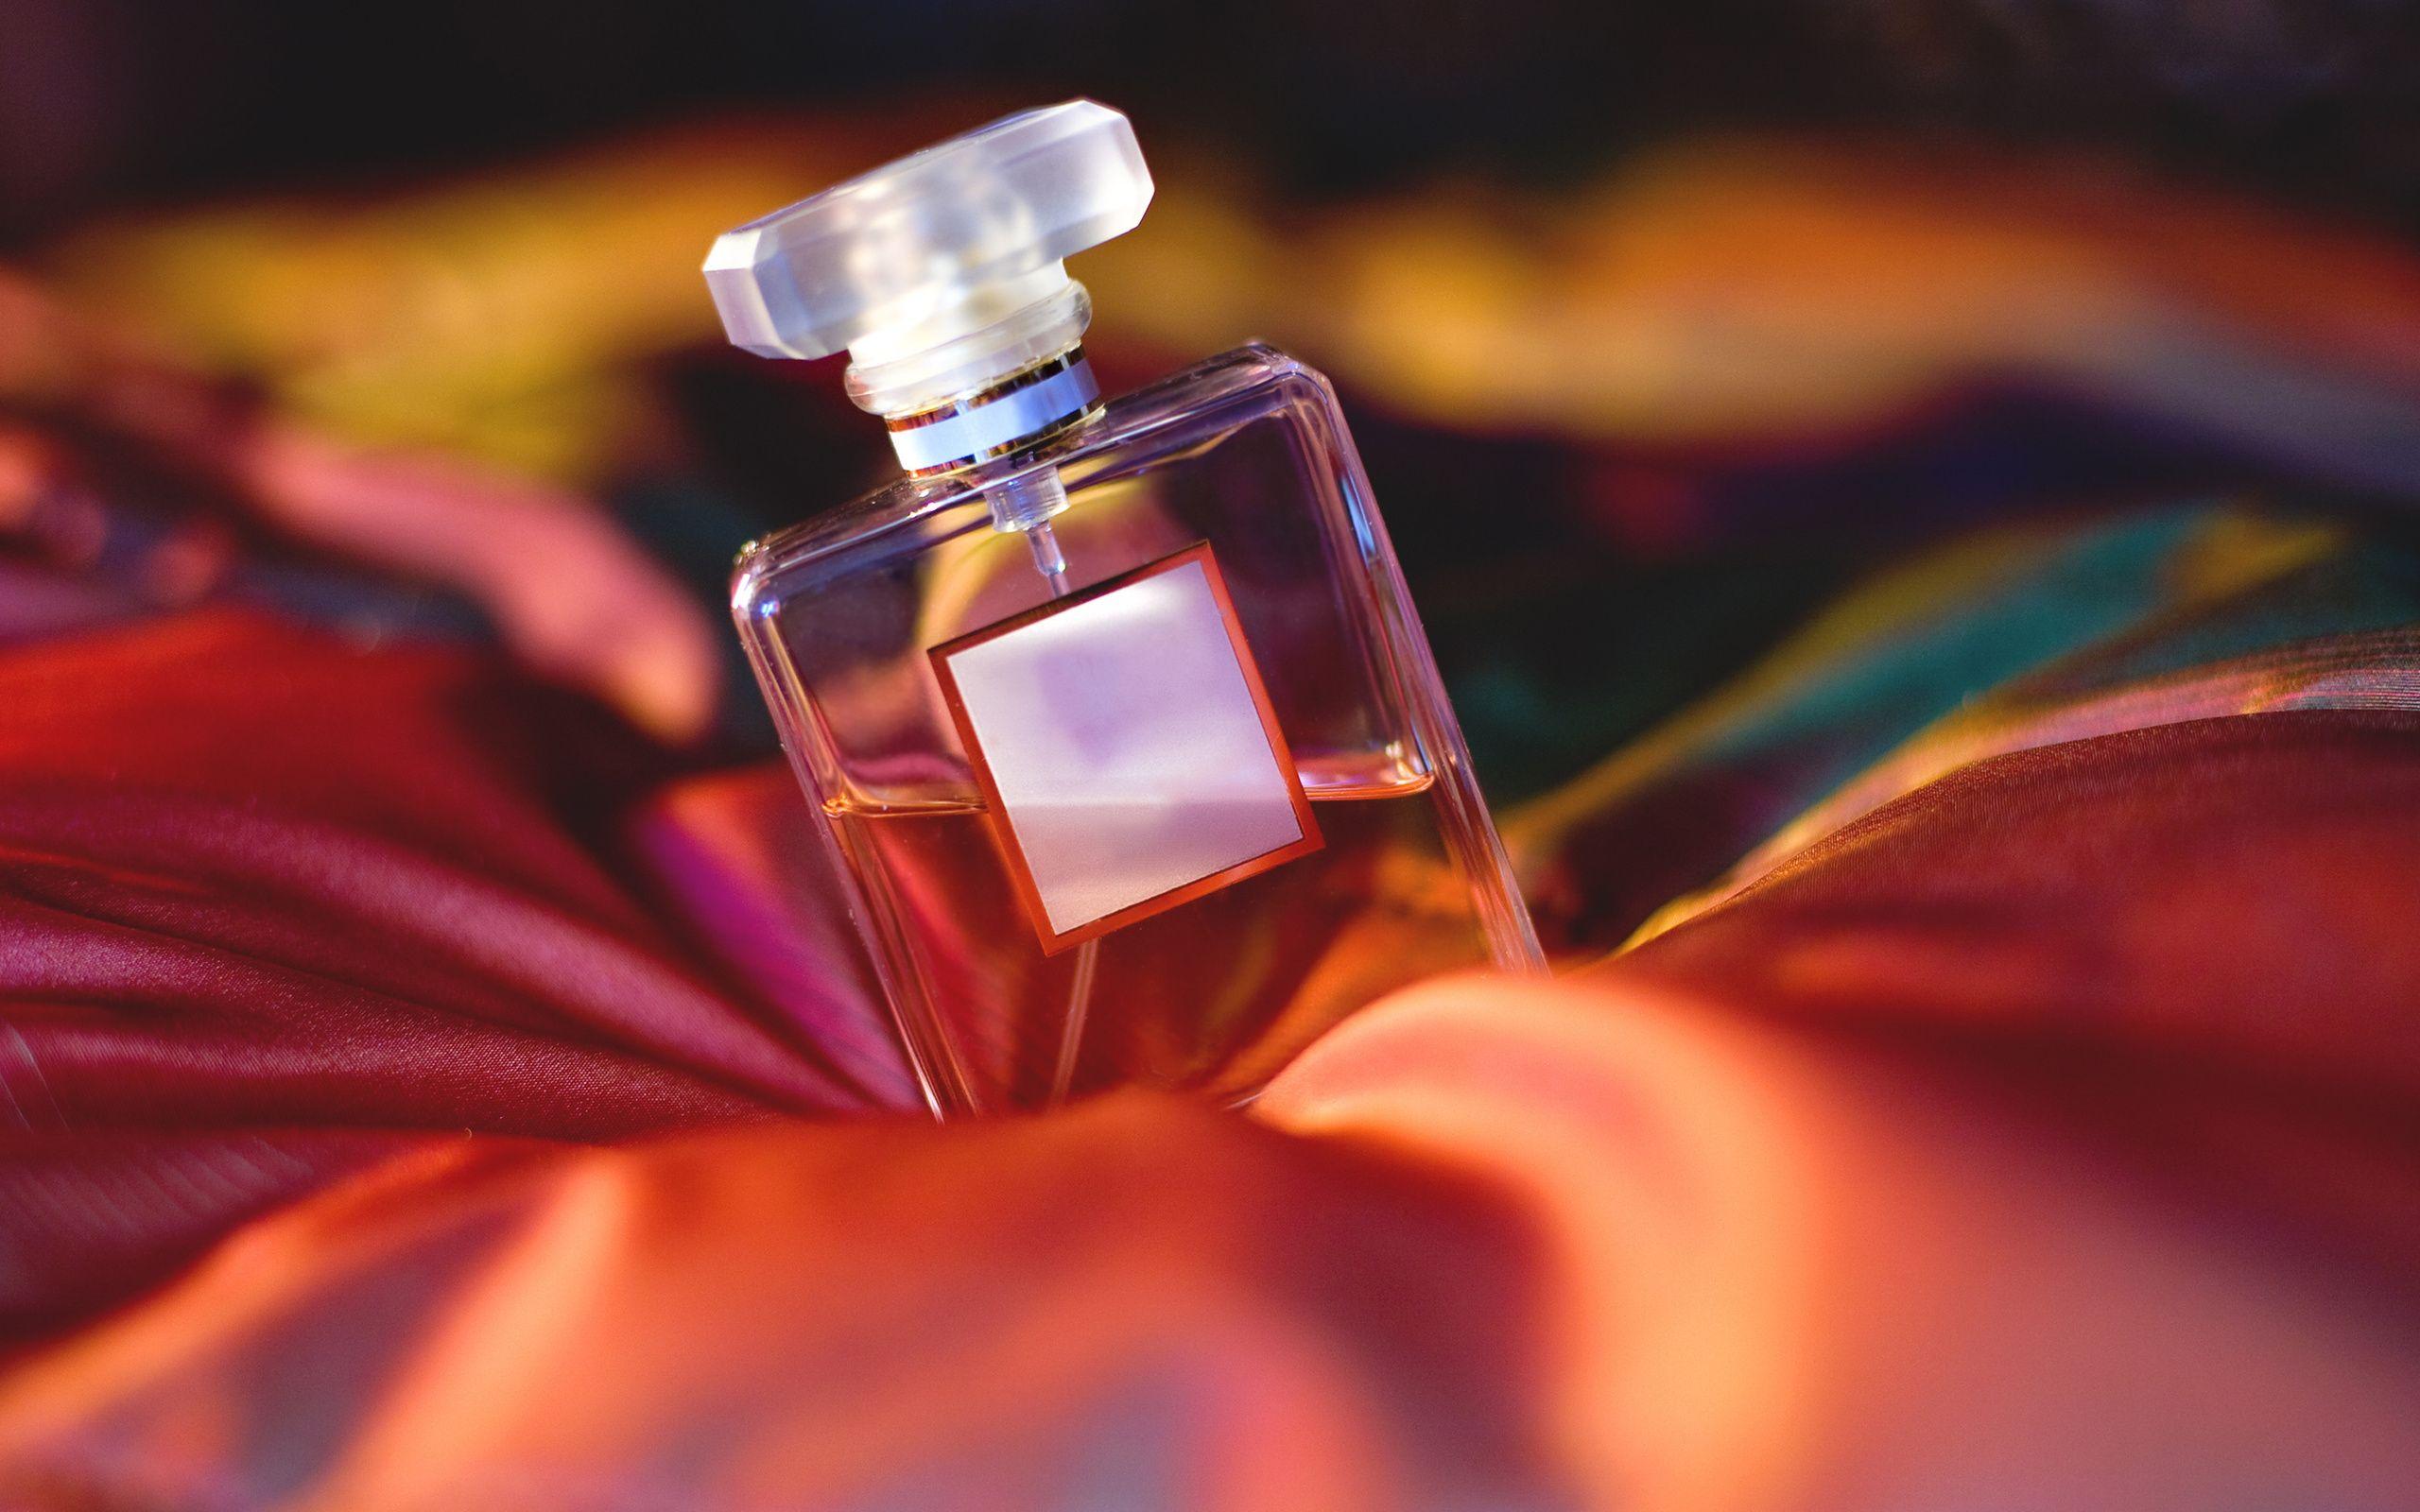 16 Perfume Hd Wallpapers - Perfume Bottle With Background , HD Wallpaper & Backgrounds